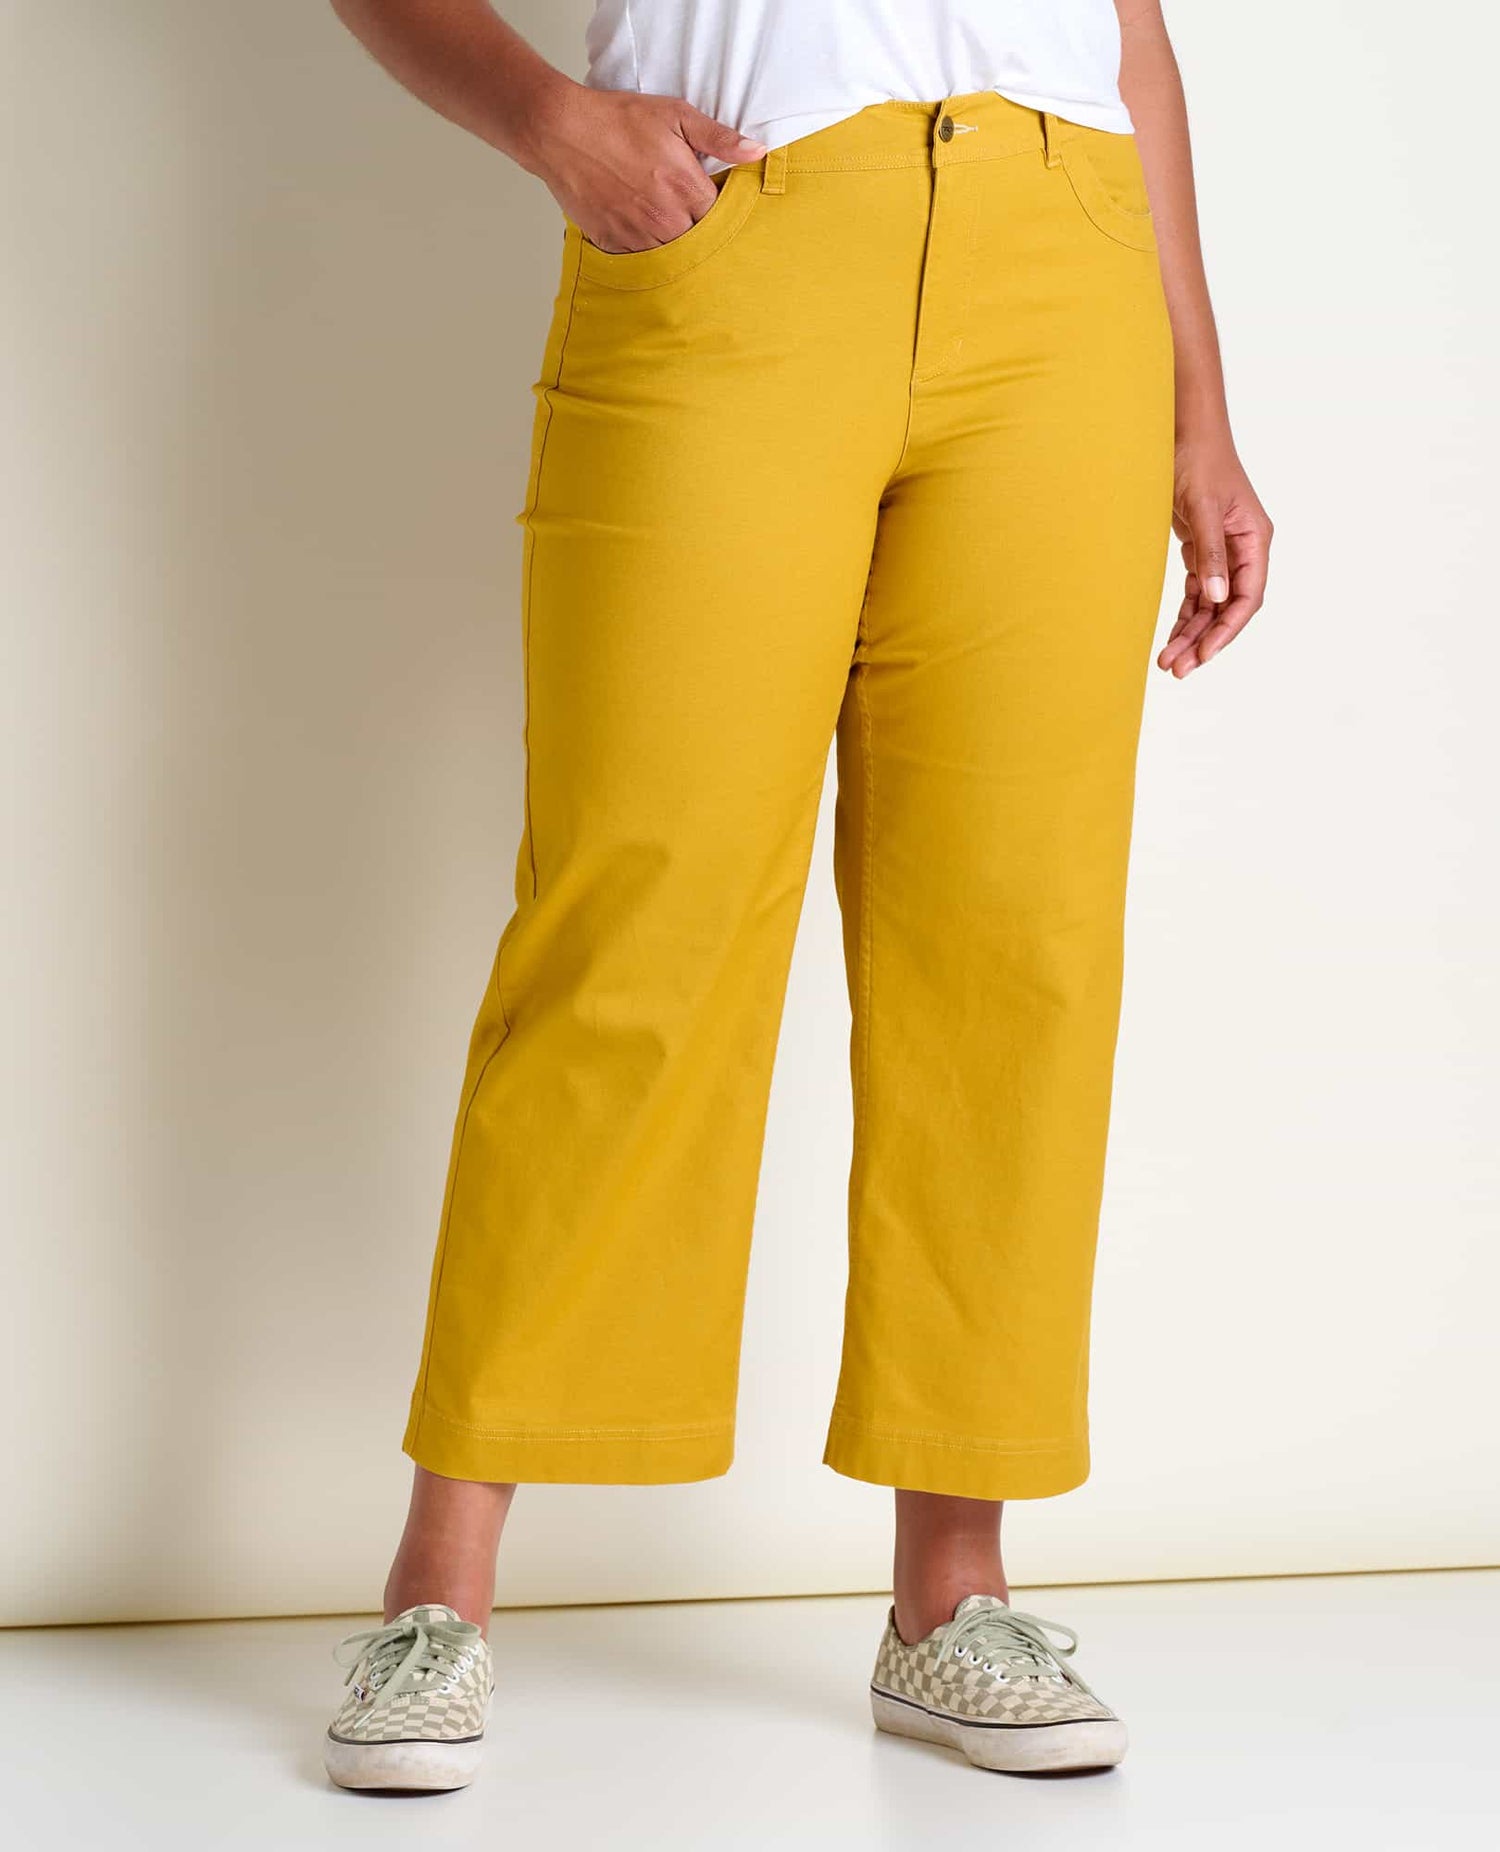 Toad & Co Earthworks Wide Leg Pant